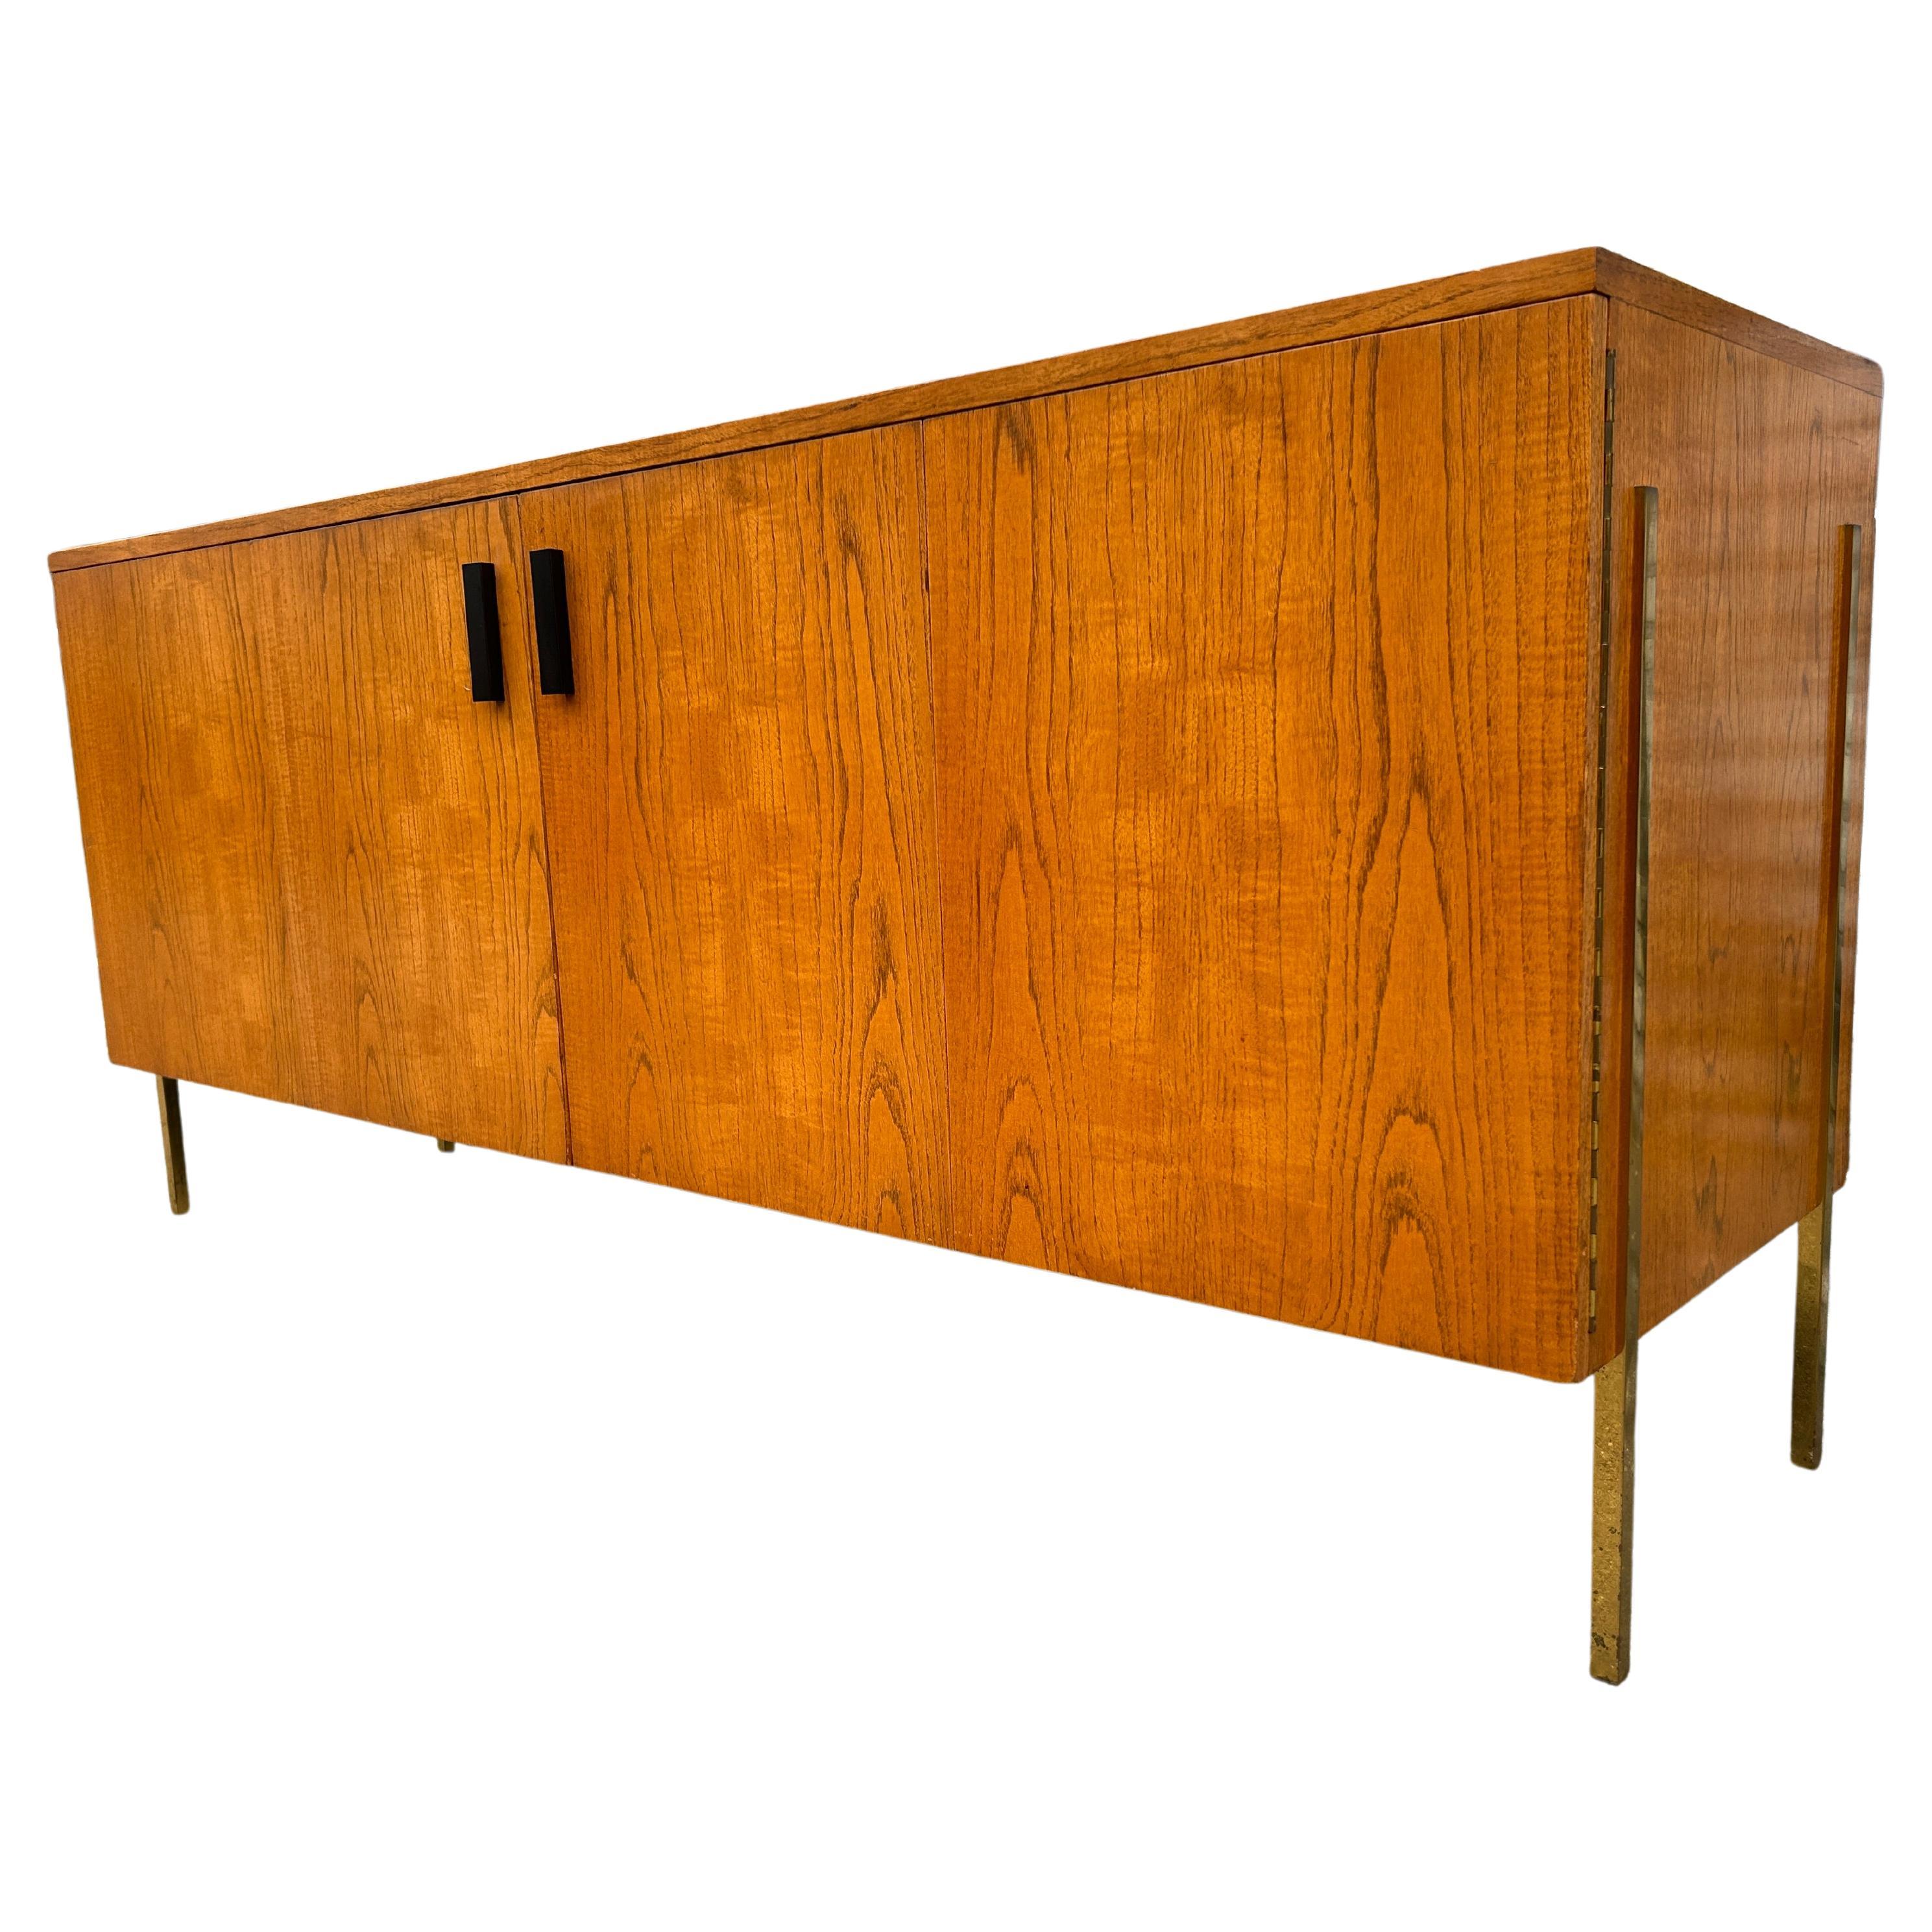 Mid-20th Century Stunning Midcentury Harvey Probber Credenza Sideboard Audio Cabinet  For Sale